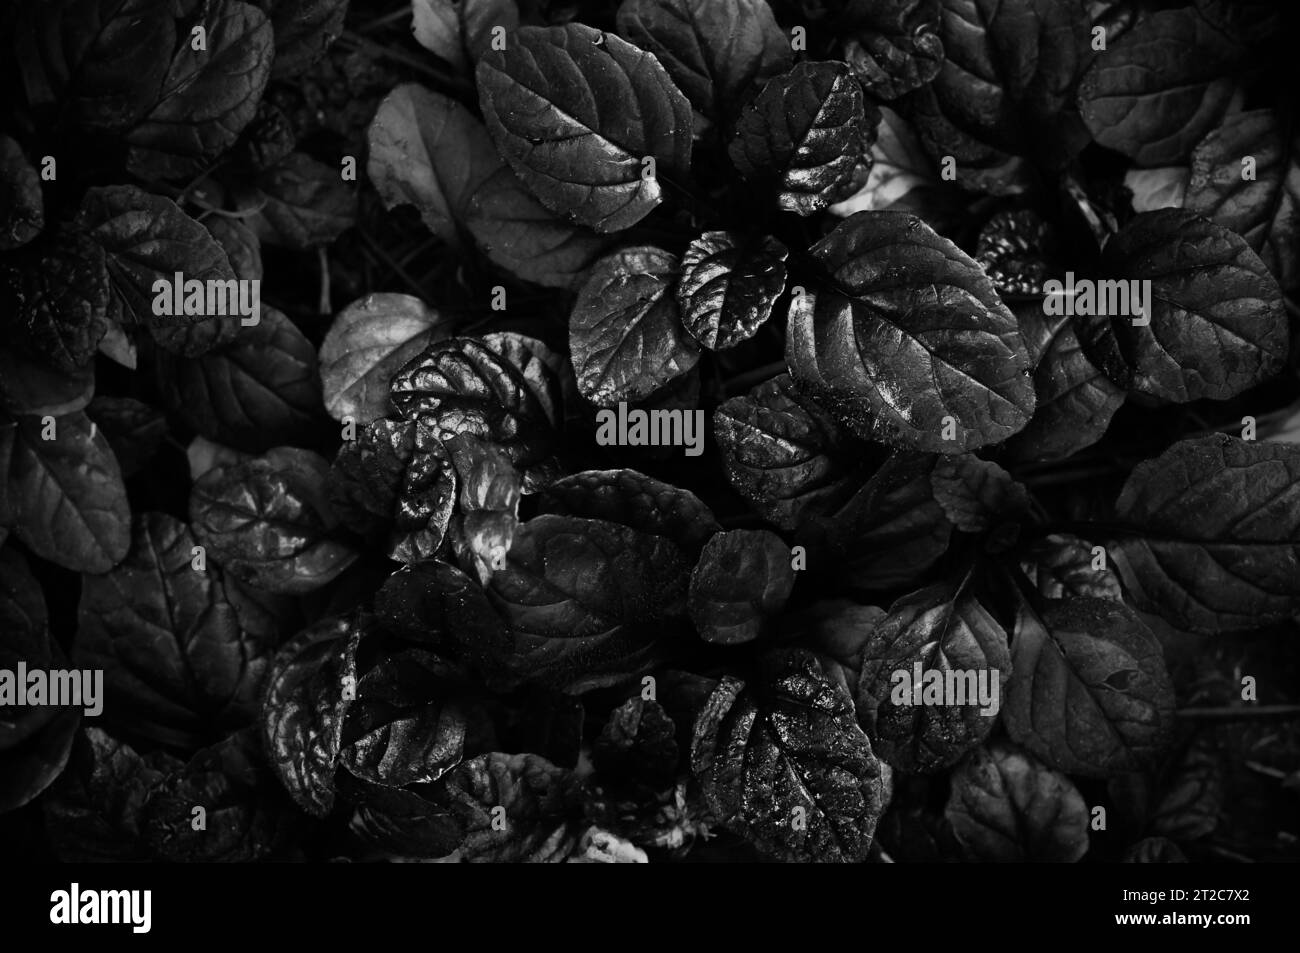 Dark abstract dense background with bugleweed Ajuga reptans - Black Scallop. Black and white. Beautiful nature wallpaper Stock Photo